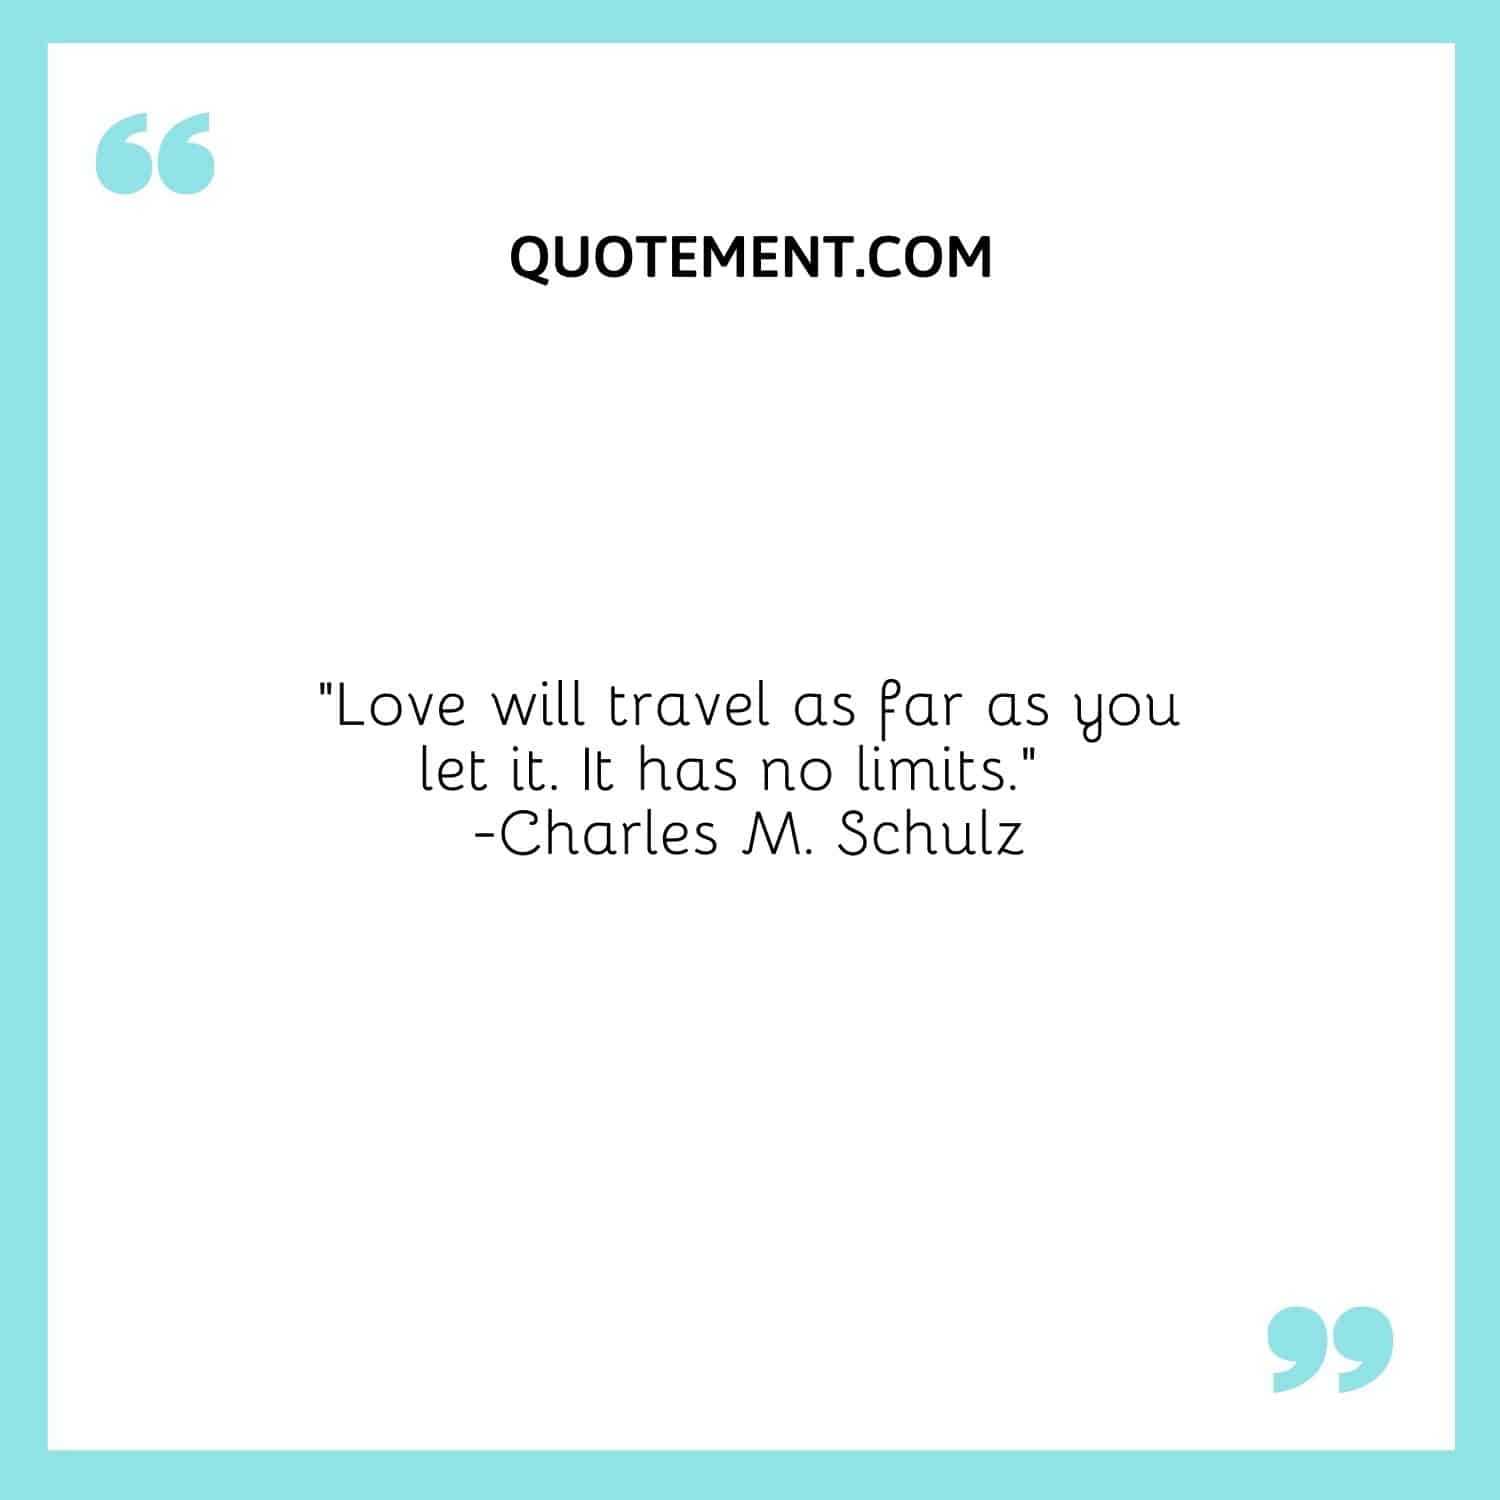 Love will travel as far as you let it. It has no limits